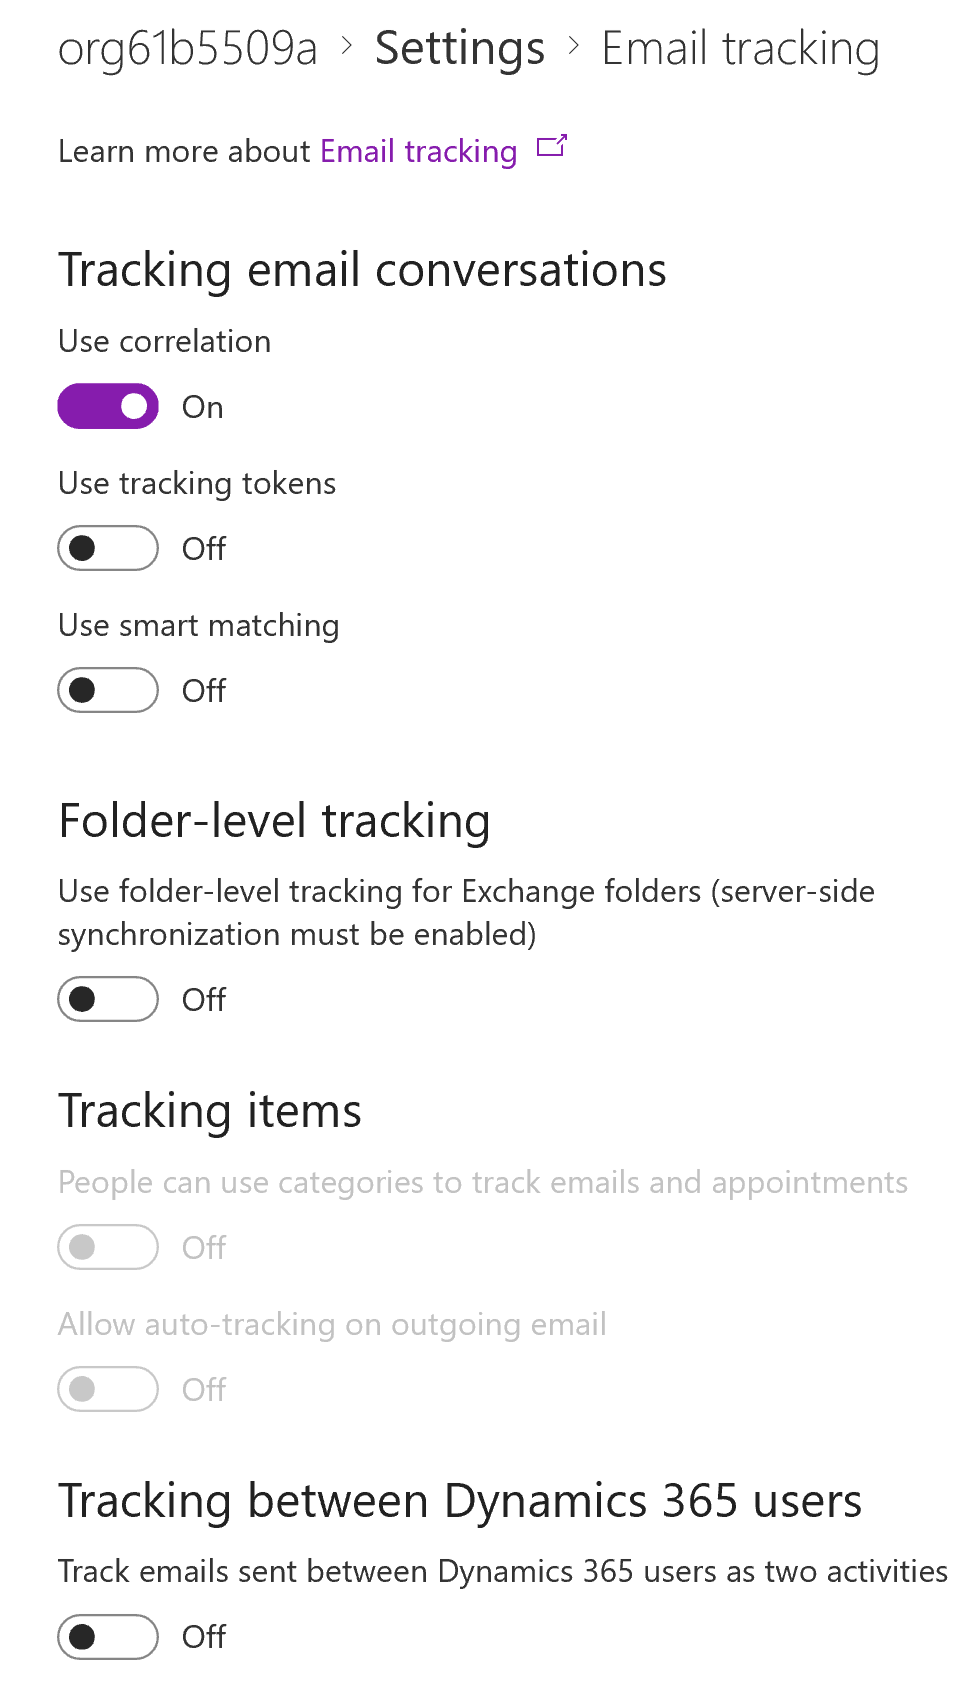 Screenshot showing the email tracking form